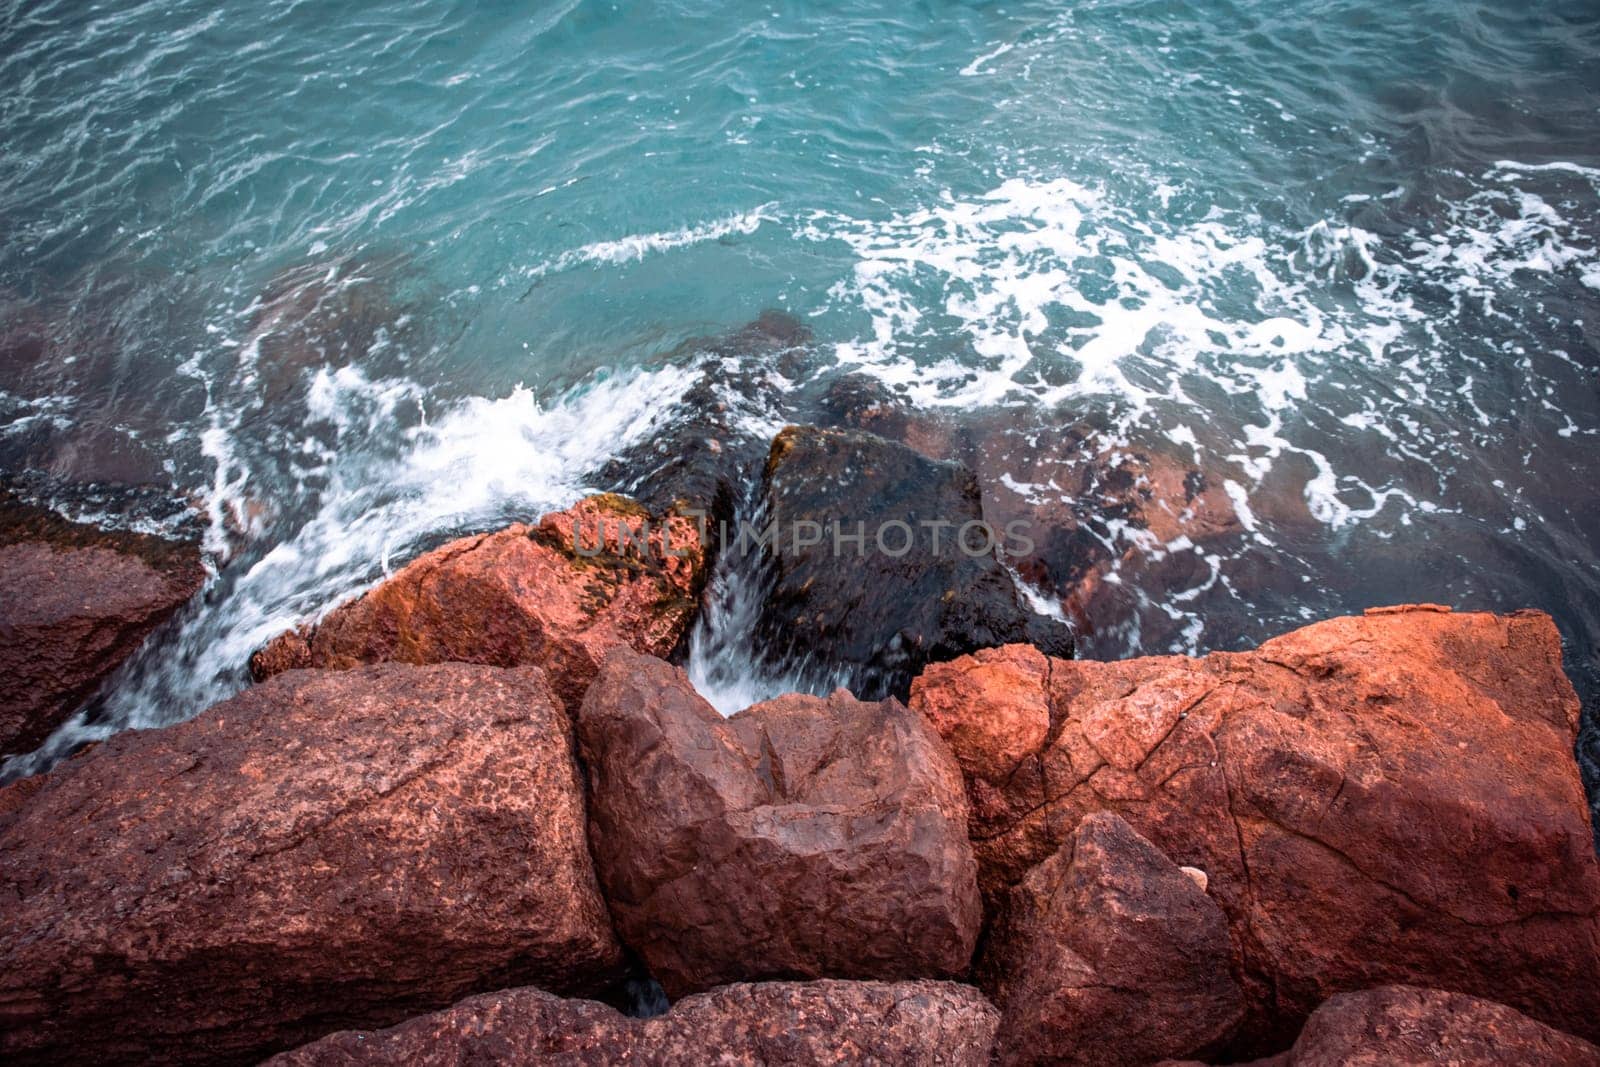 Mediterranean winter stormy seaside. Close up water with stones on the beach concept photo. by _Nataly_Nati_